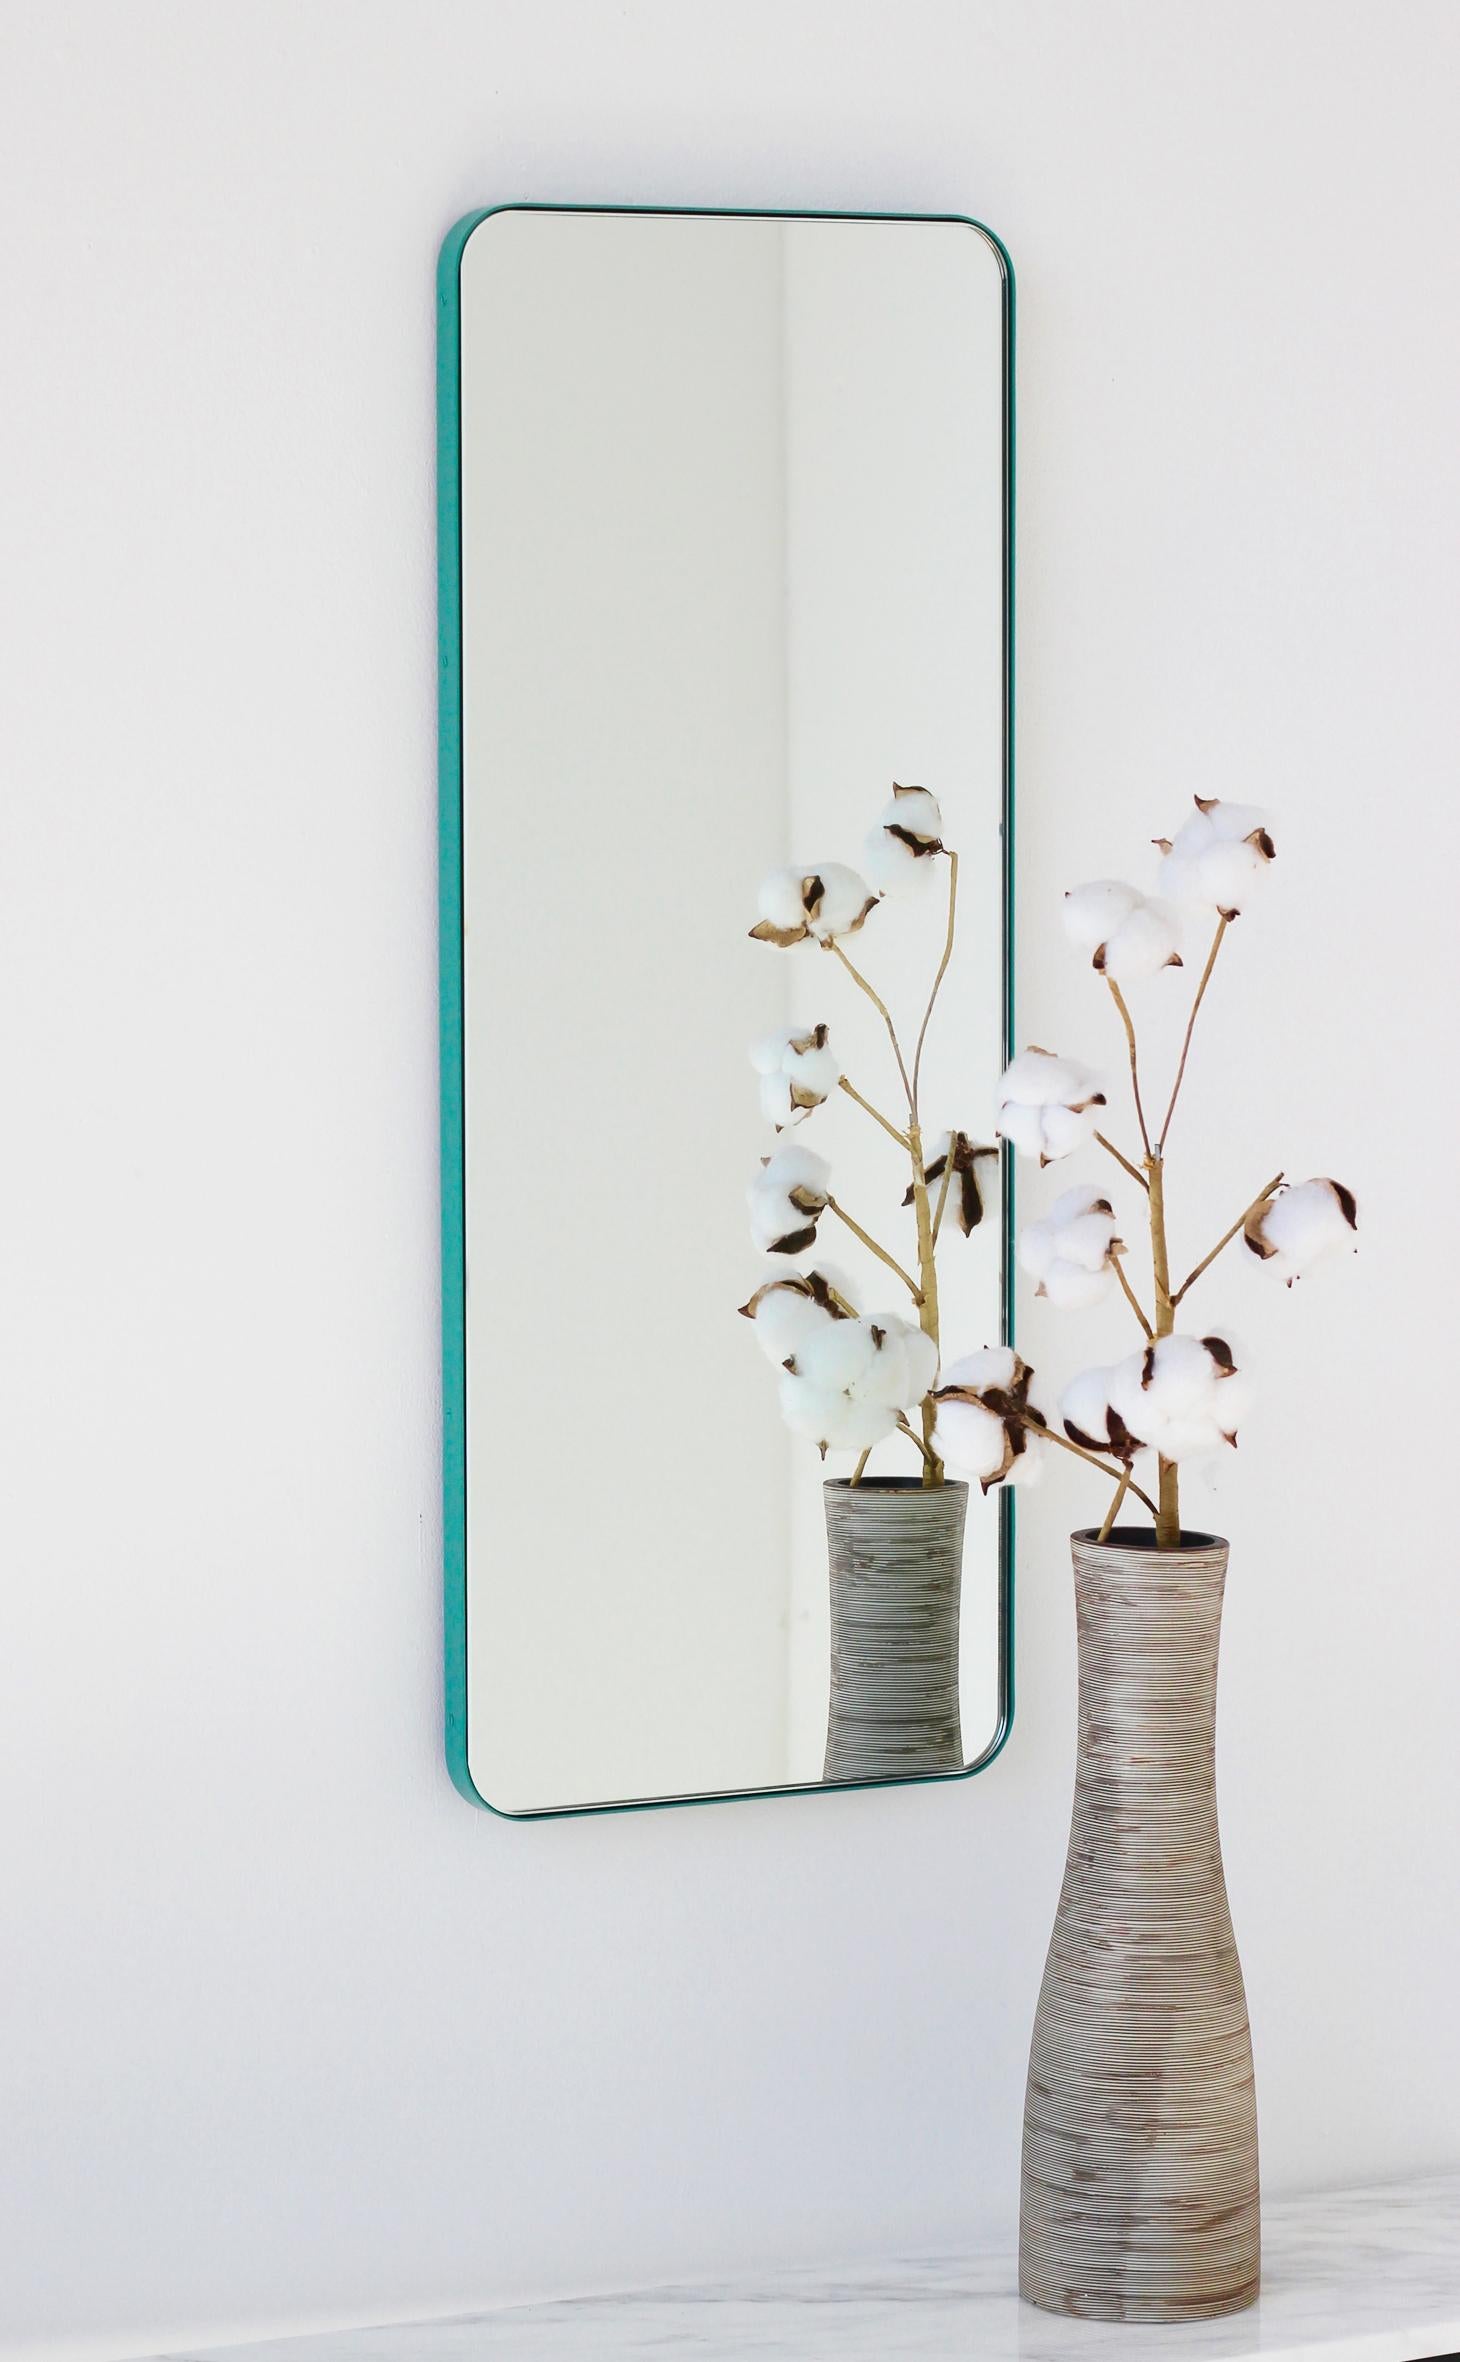 Modern rectangular mirror with an aluminium powder coated mint / turquoise frame. Part of the charming Quadris™ collection, designed and handcrafted in London, UK. 

Our mirrors are designed with an integrated French cleat (split batten) system that